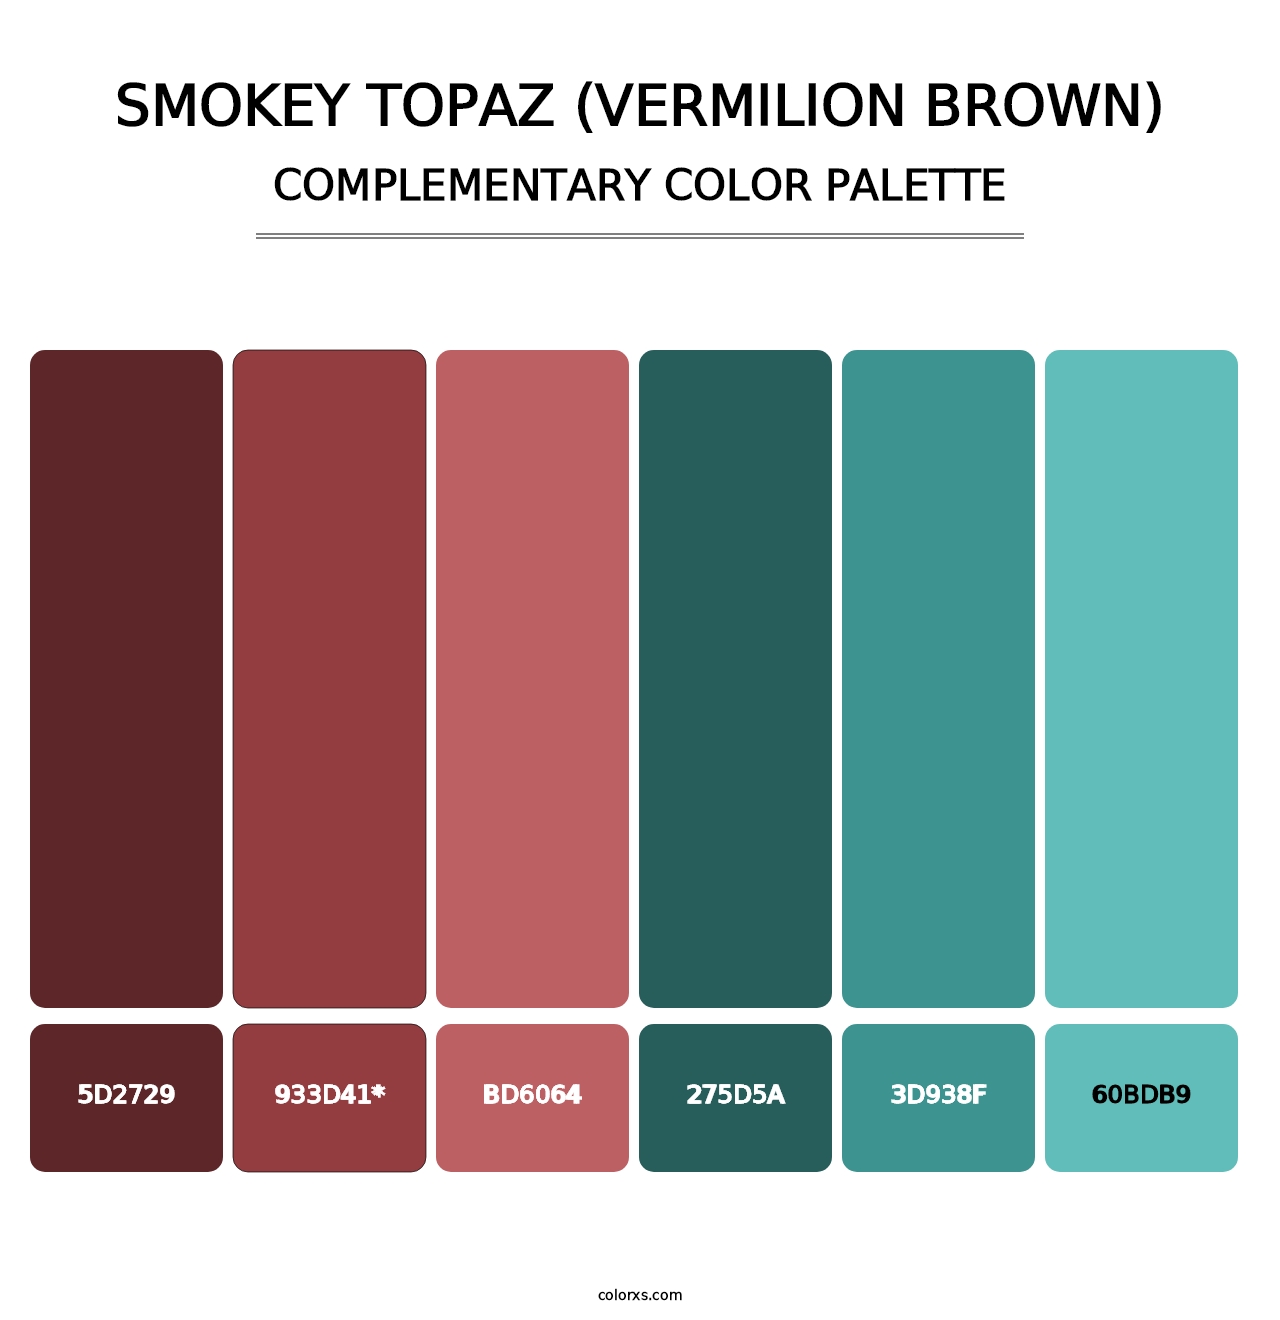 Smokey Topaz (Vermilion Brown) - Complementary Color Palette